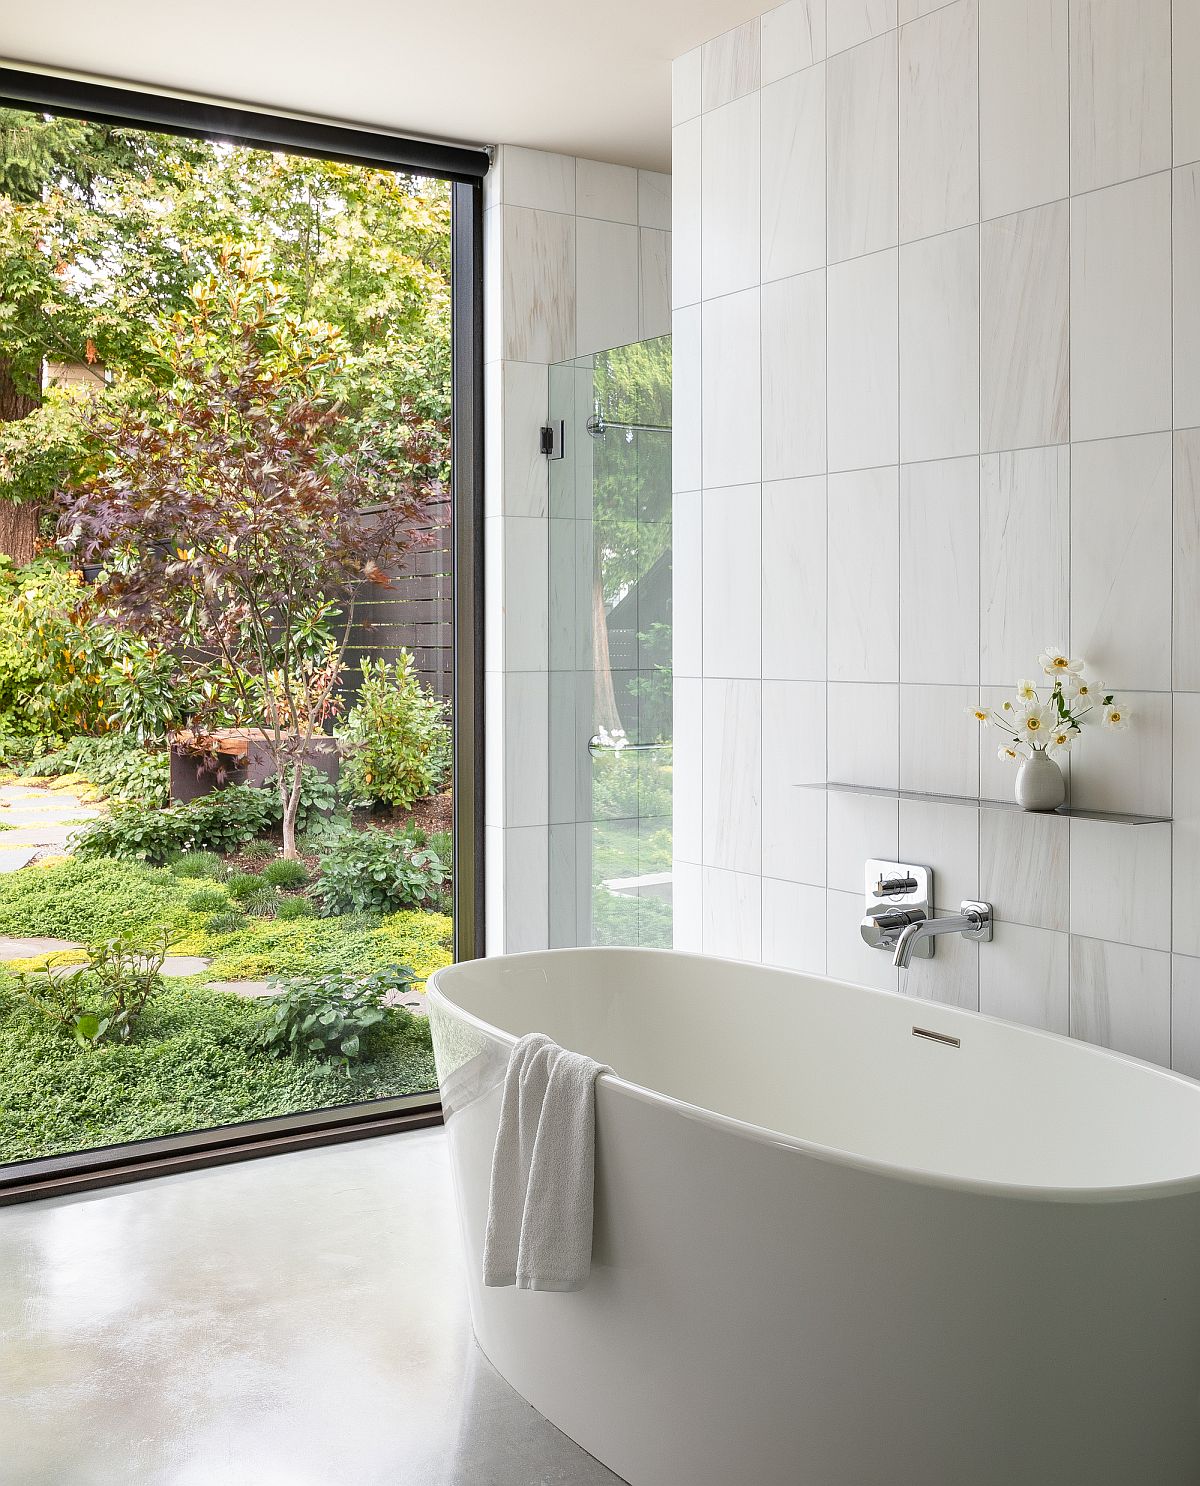 Freestanding bathtub in white is a hot trend that you can embrace for a more relaxing bathroom